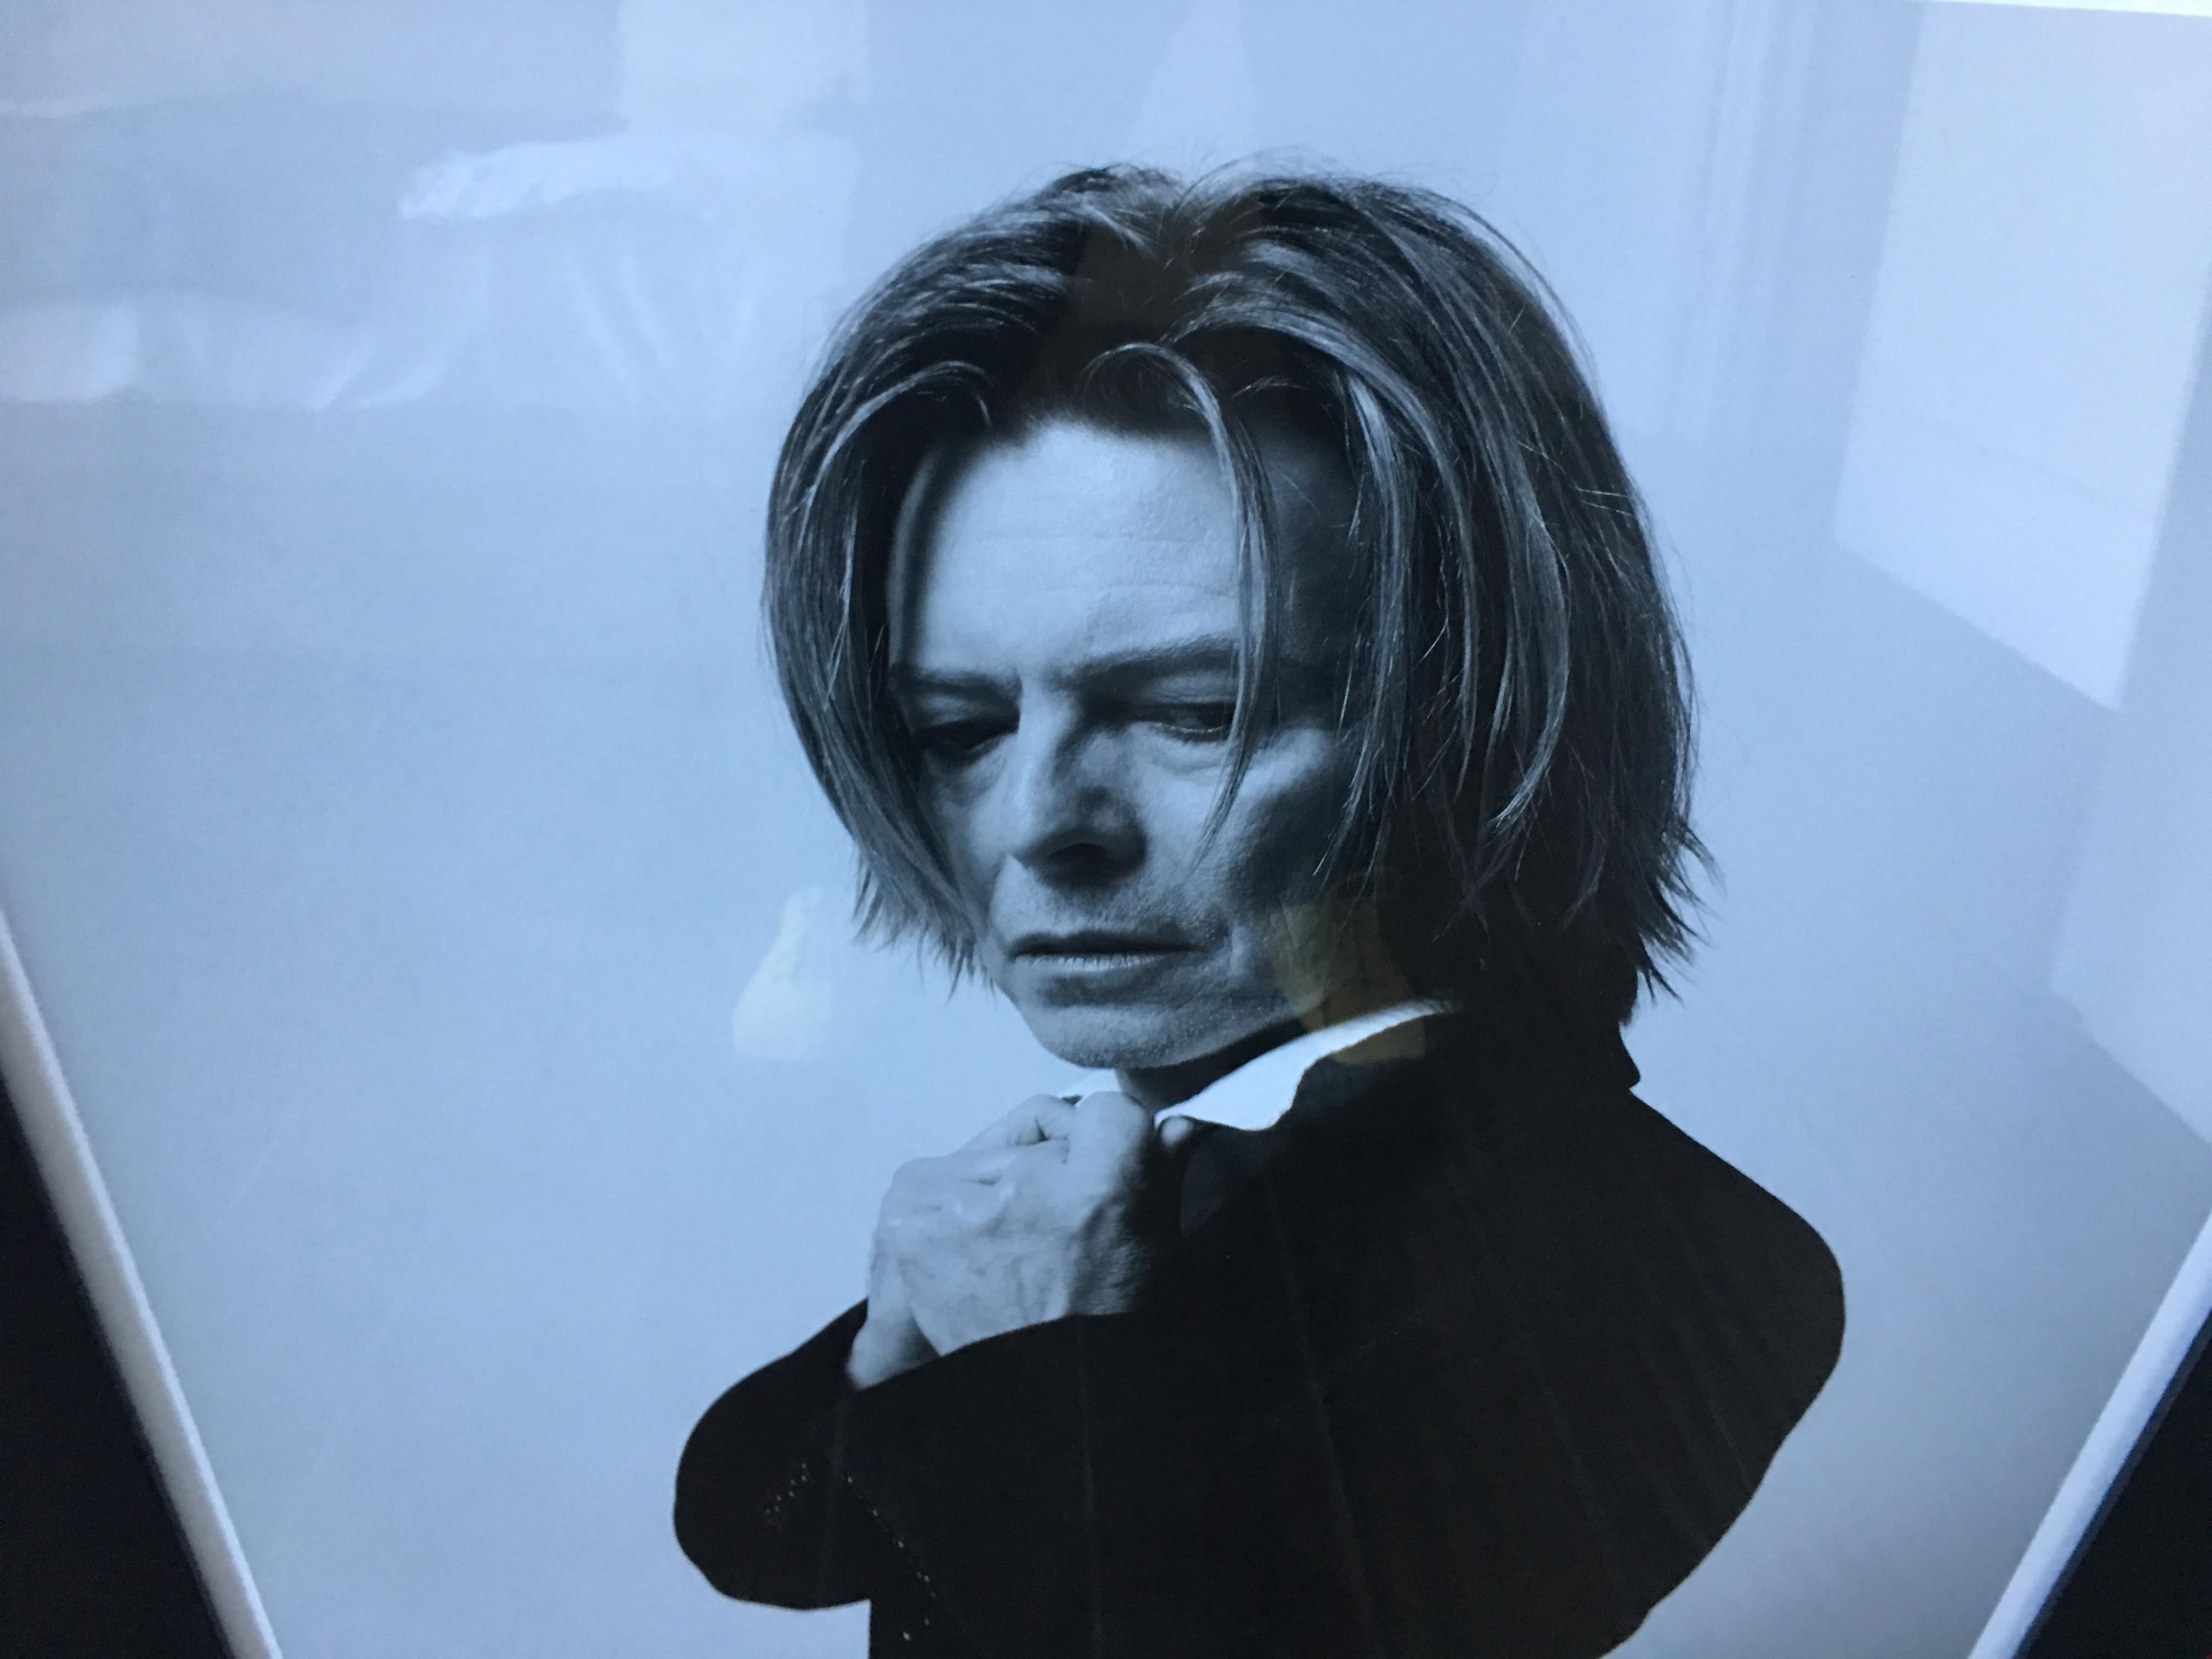 Exceptional photograph of David Bowie by Mick Rock, hand signed and numbered.